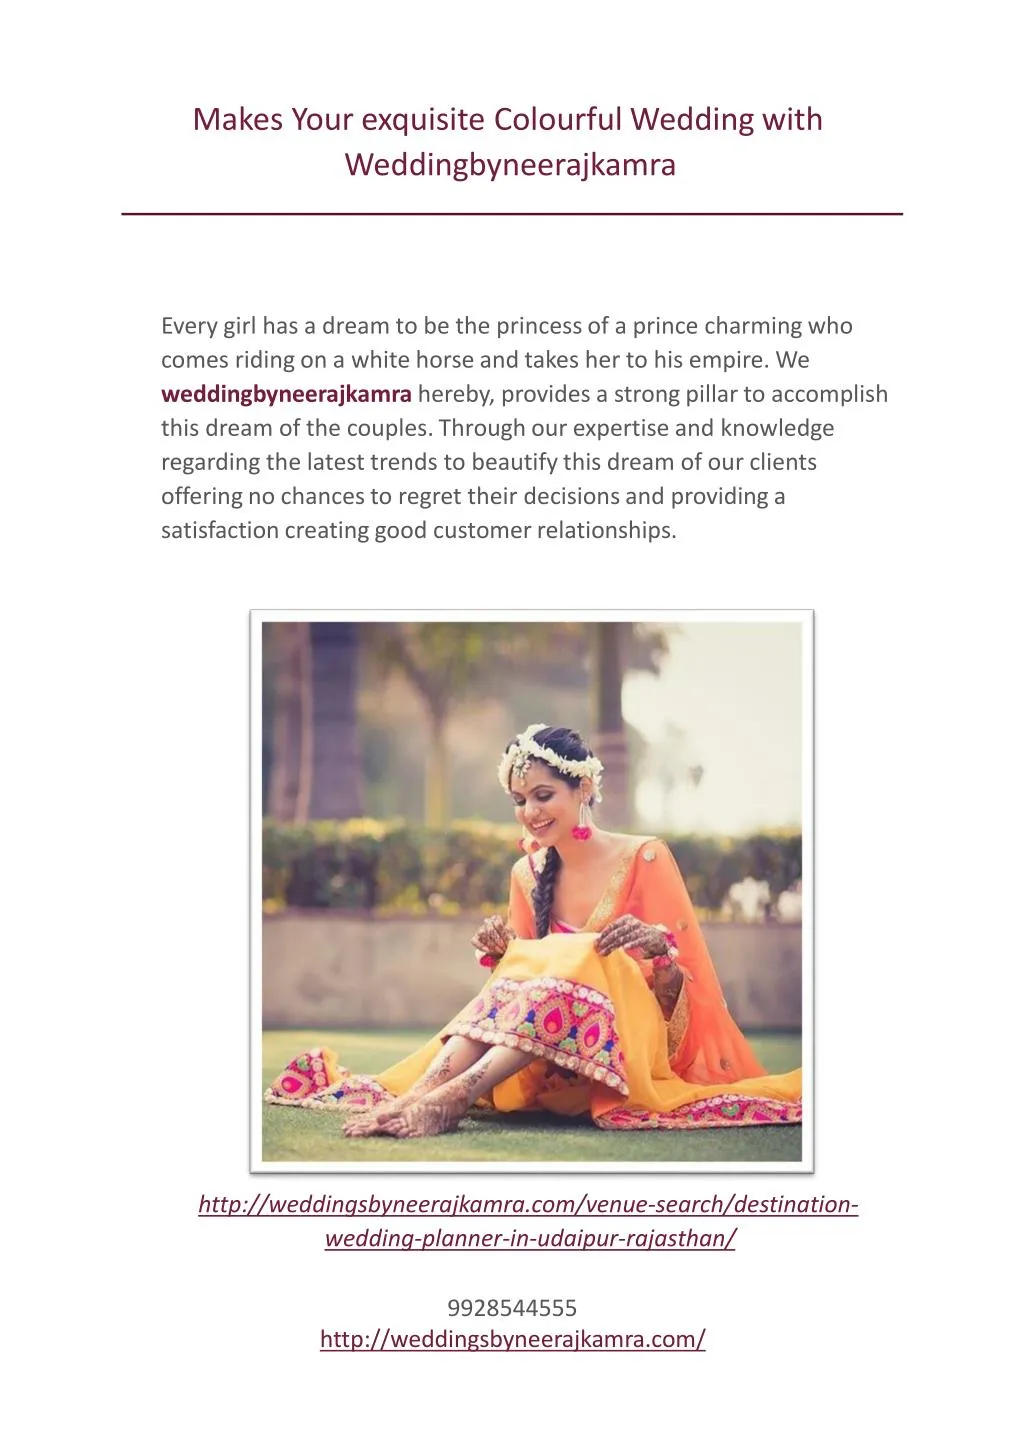 makes your exquisite colourful wedding with